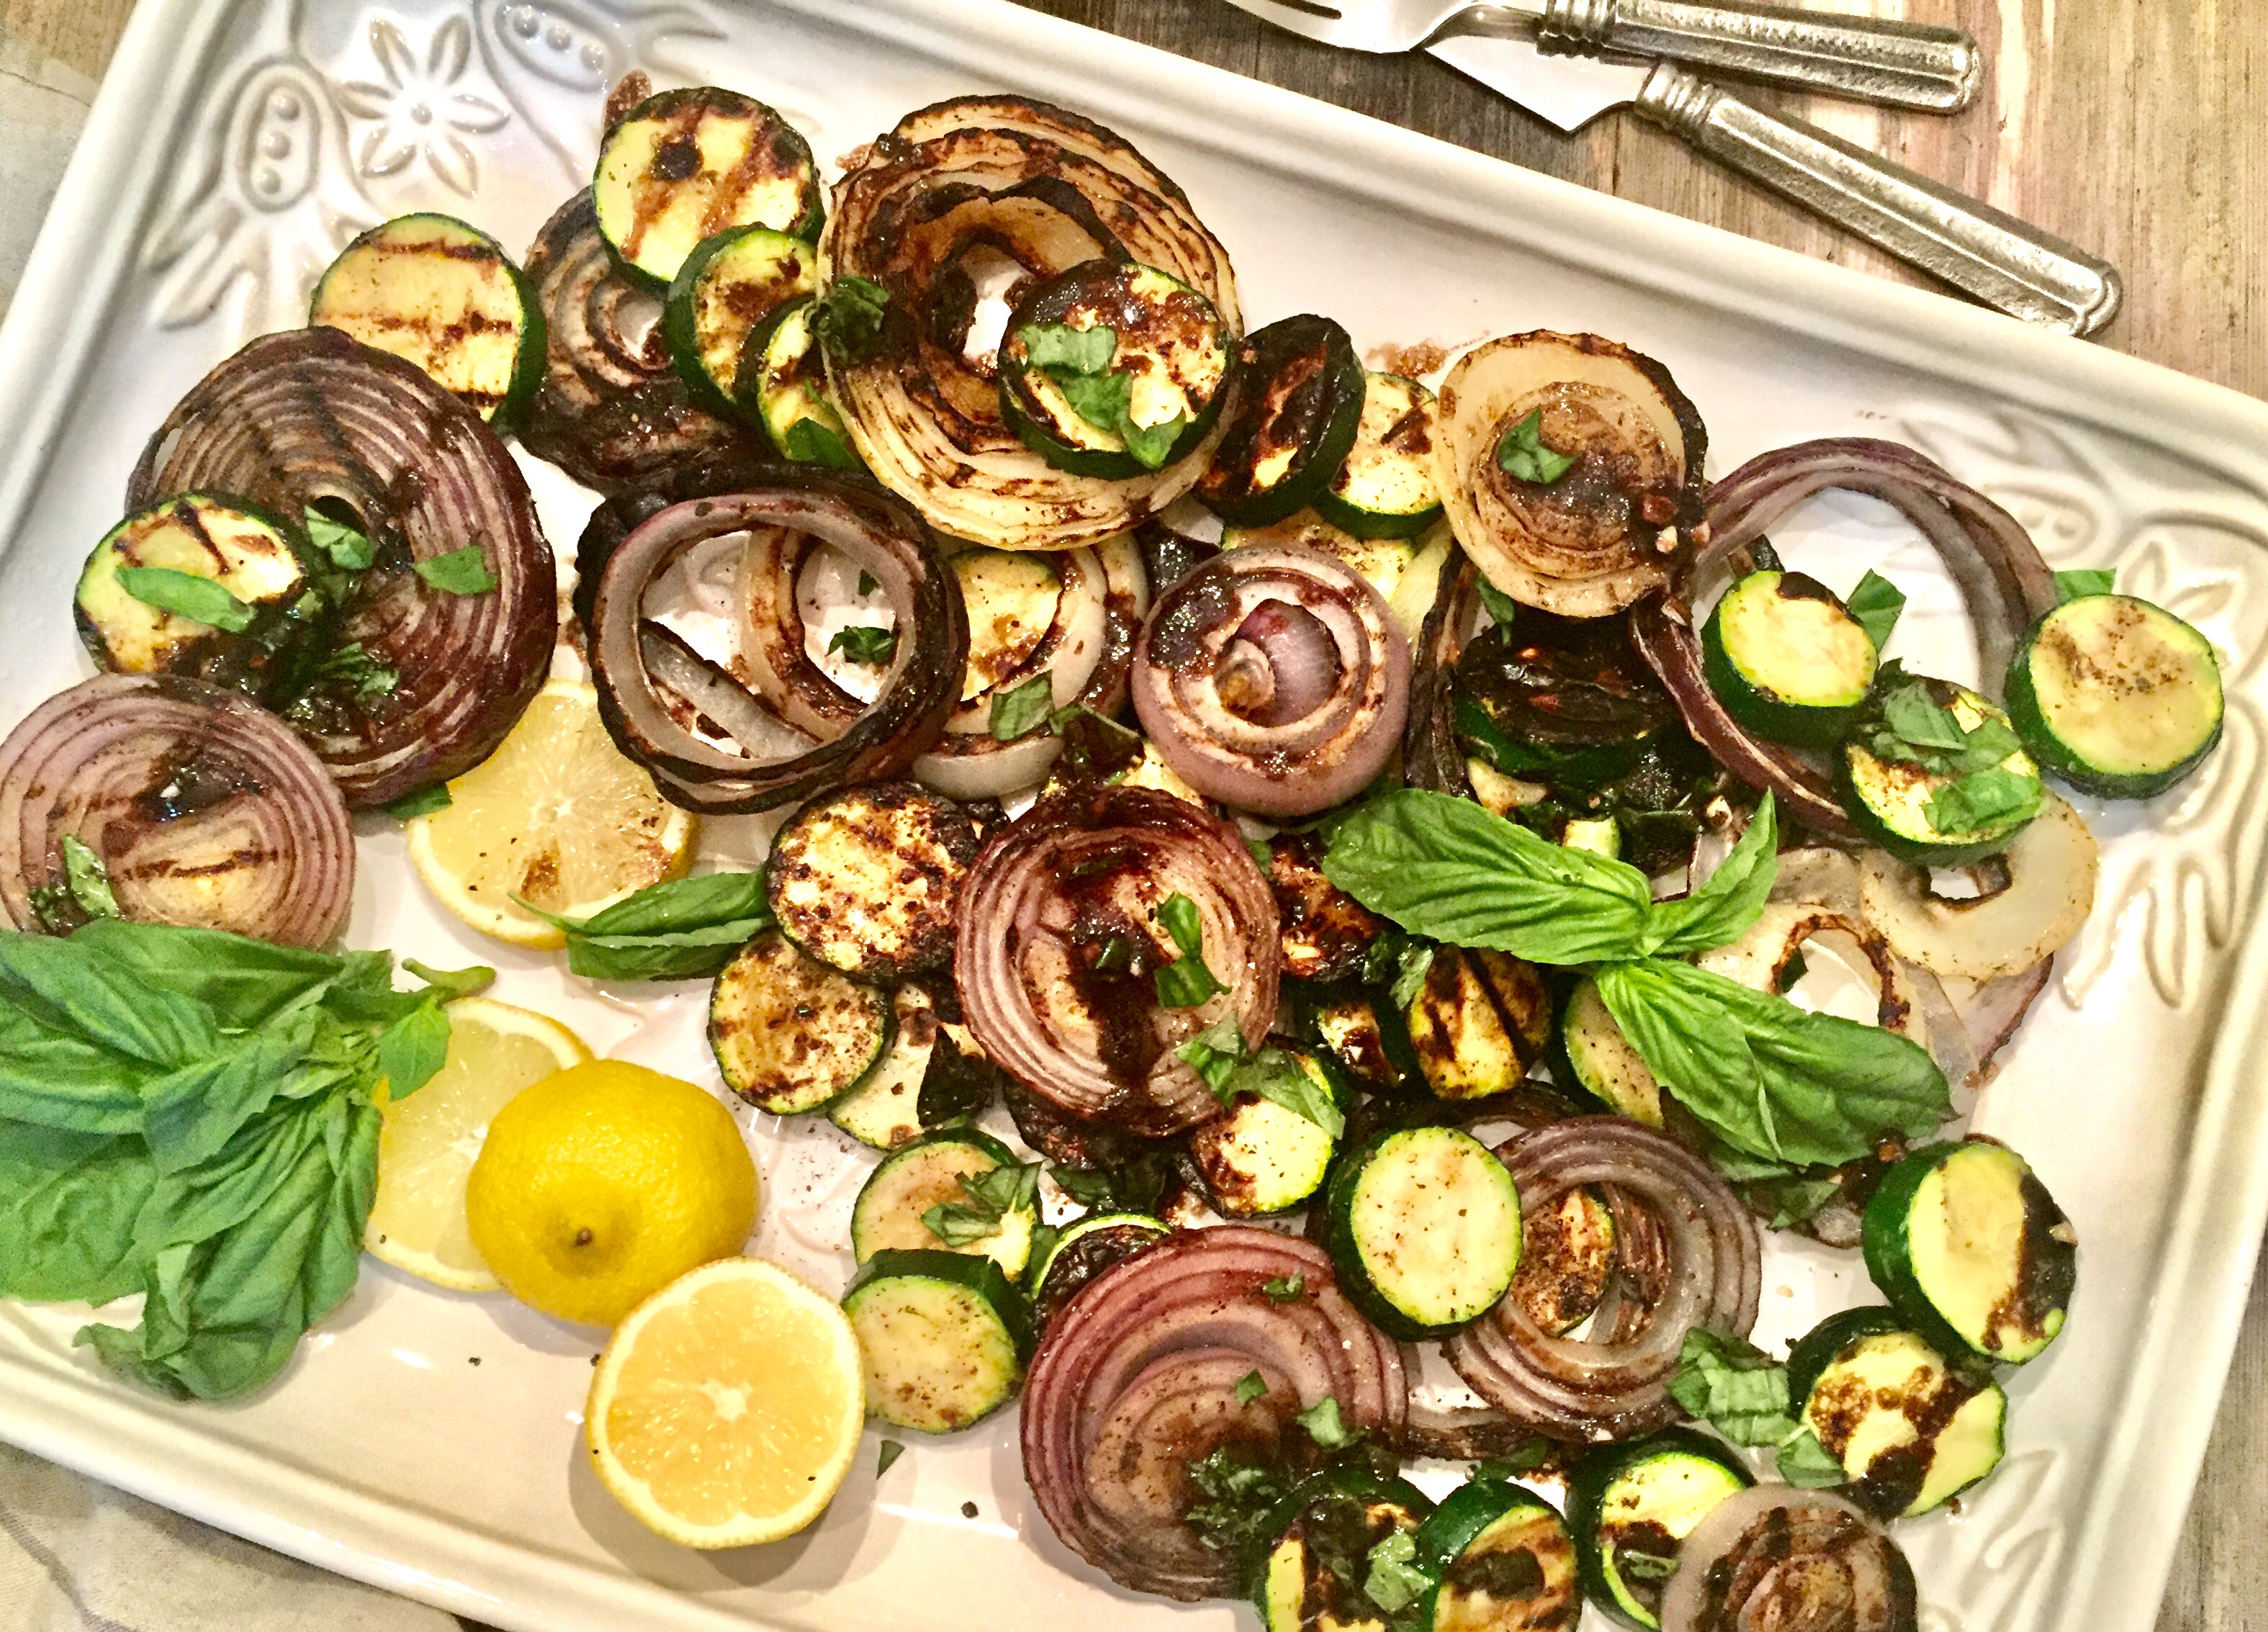 Grilled Red Onion and Zucchini Salad with a Smoked Balsamic Vinaigrette